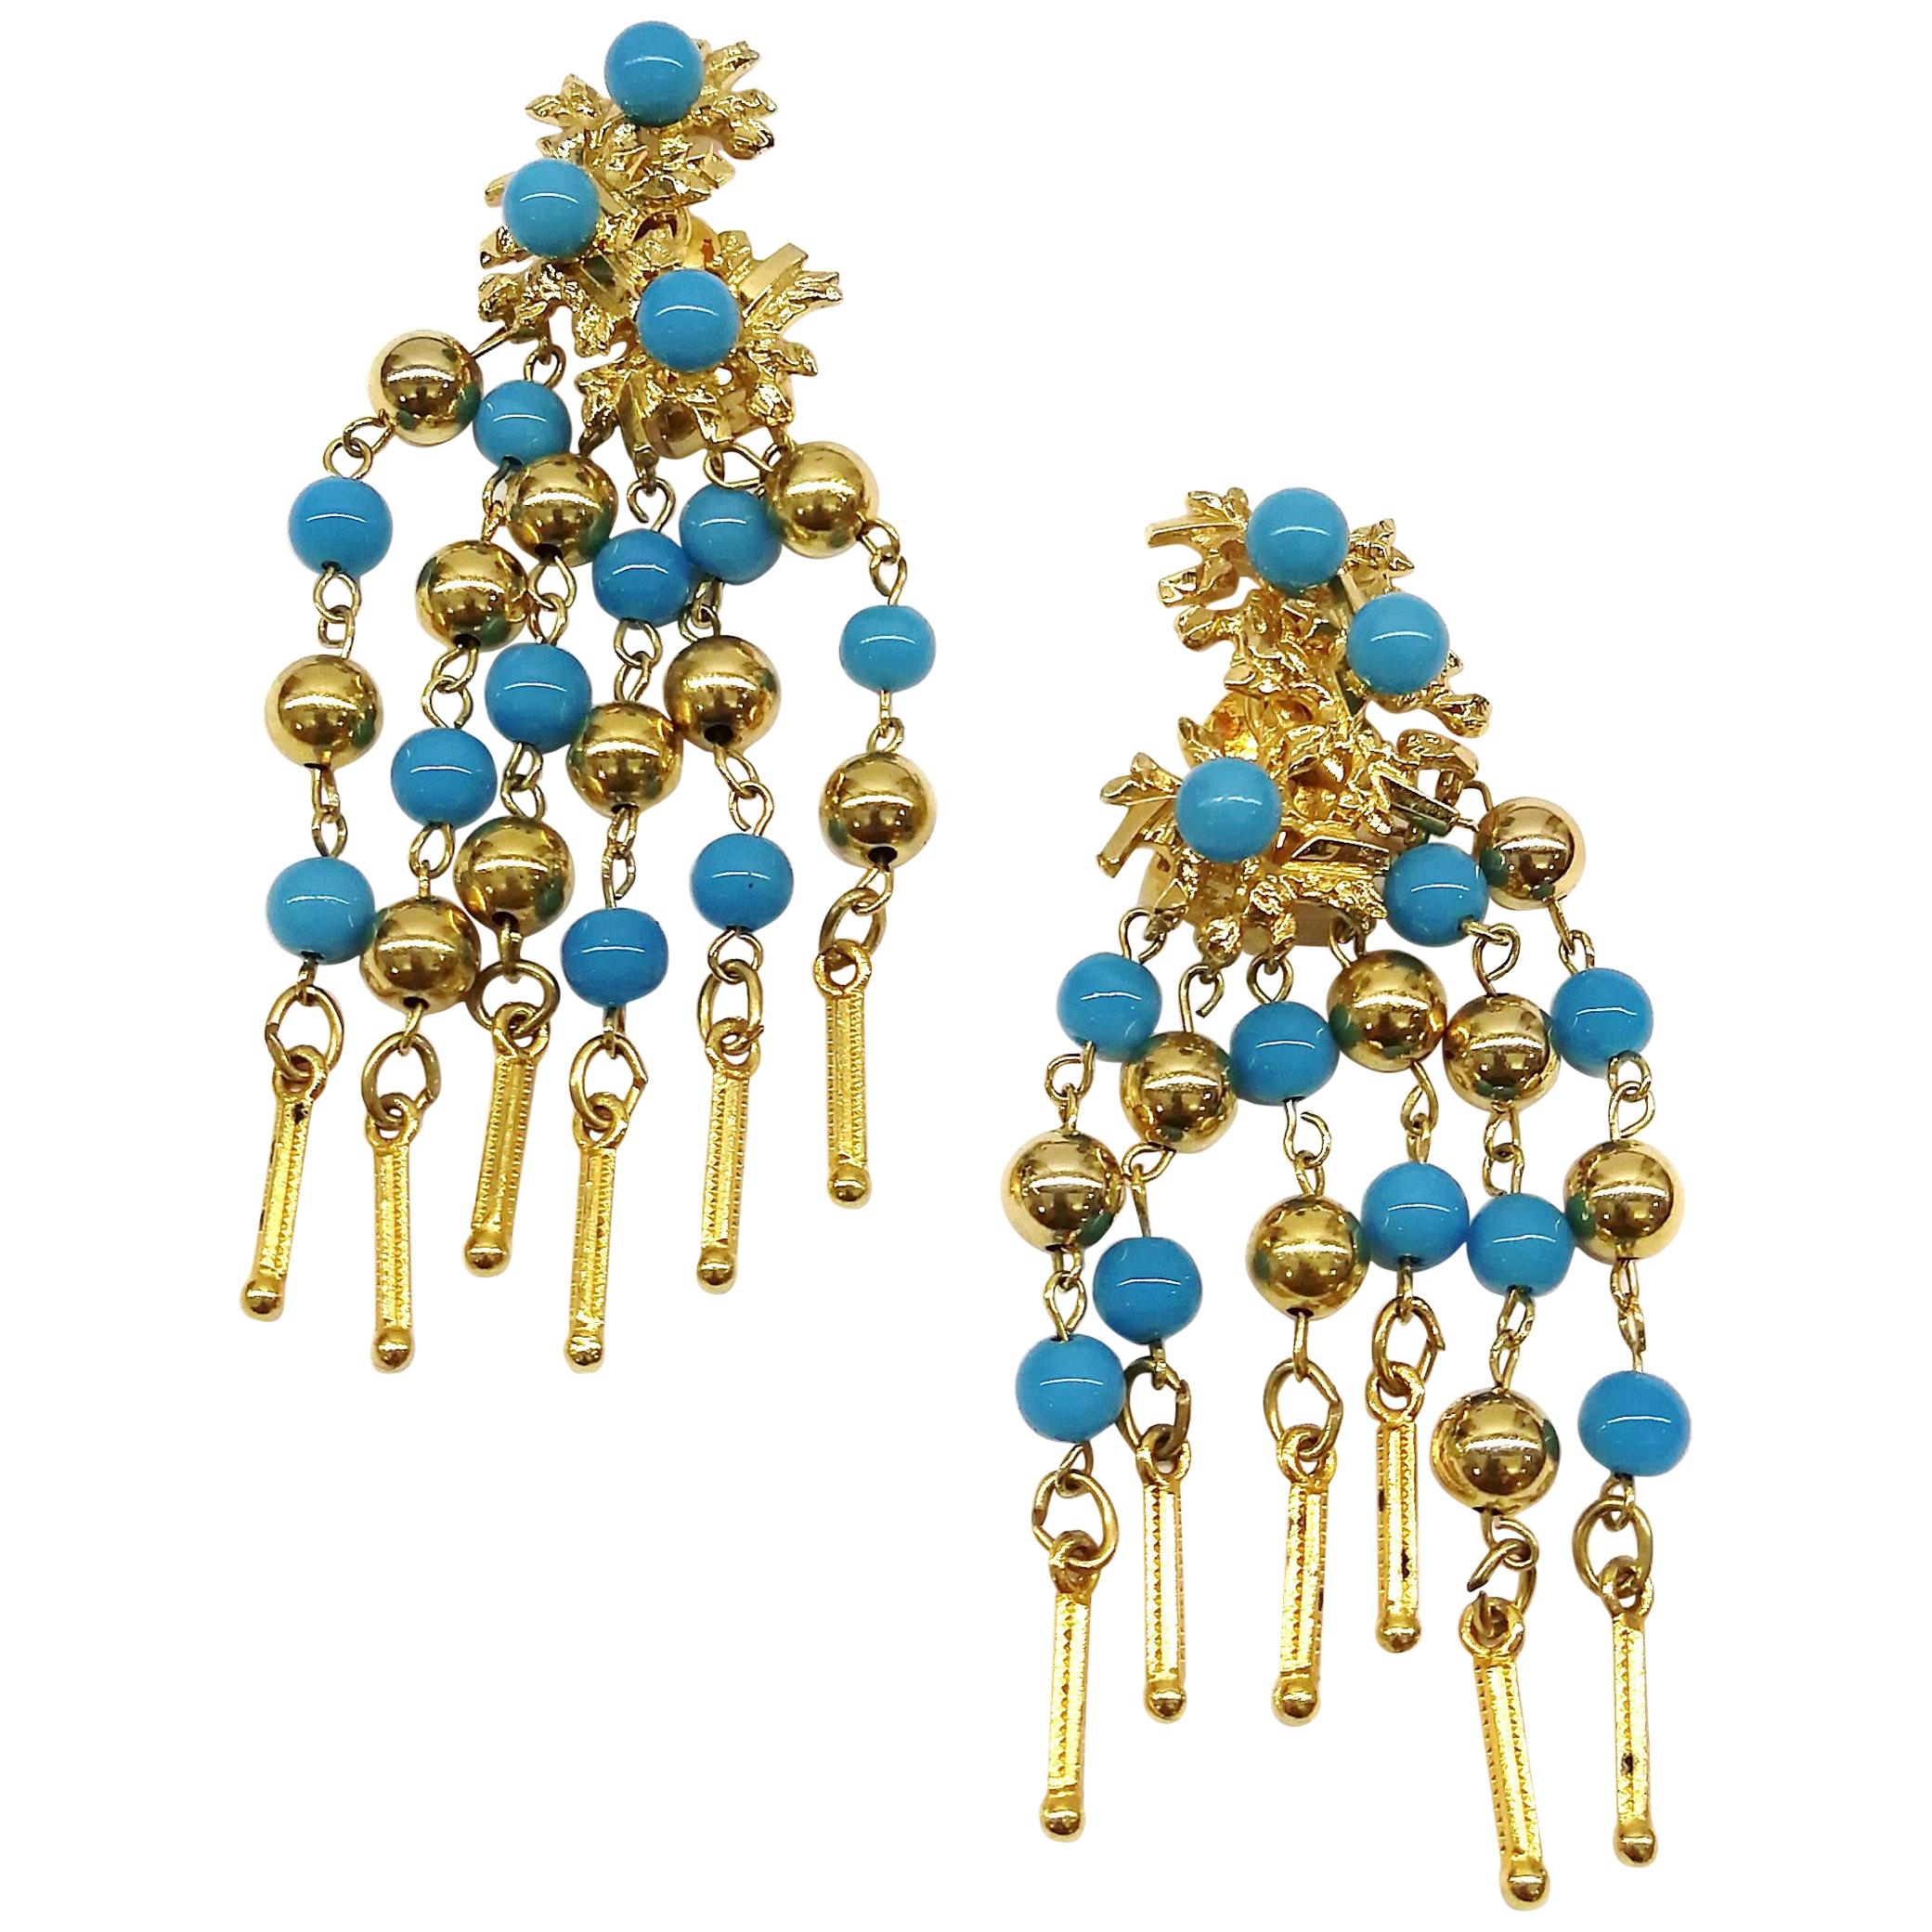 Long gilt metal and turquoise glass bead fringed earrings, Christian Dior, 1968